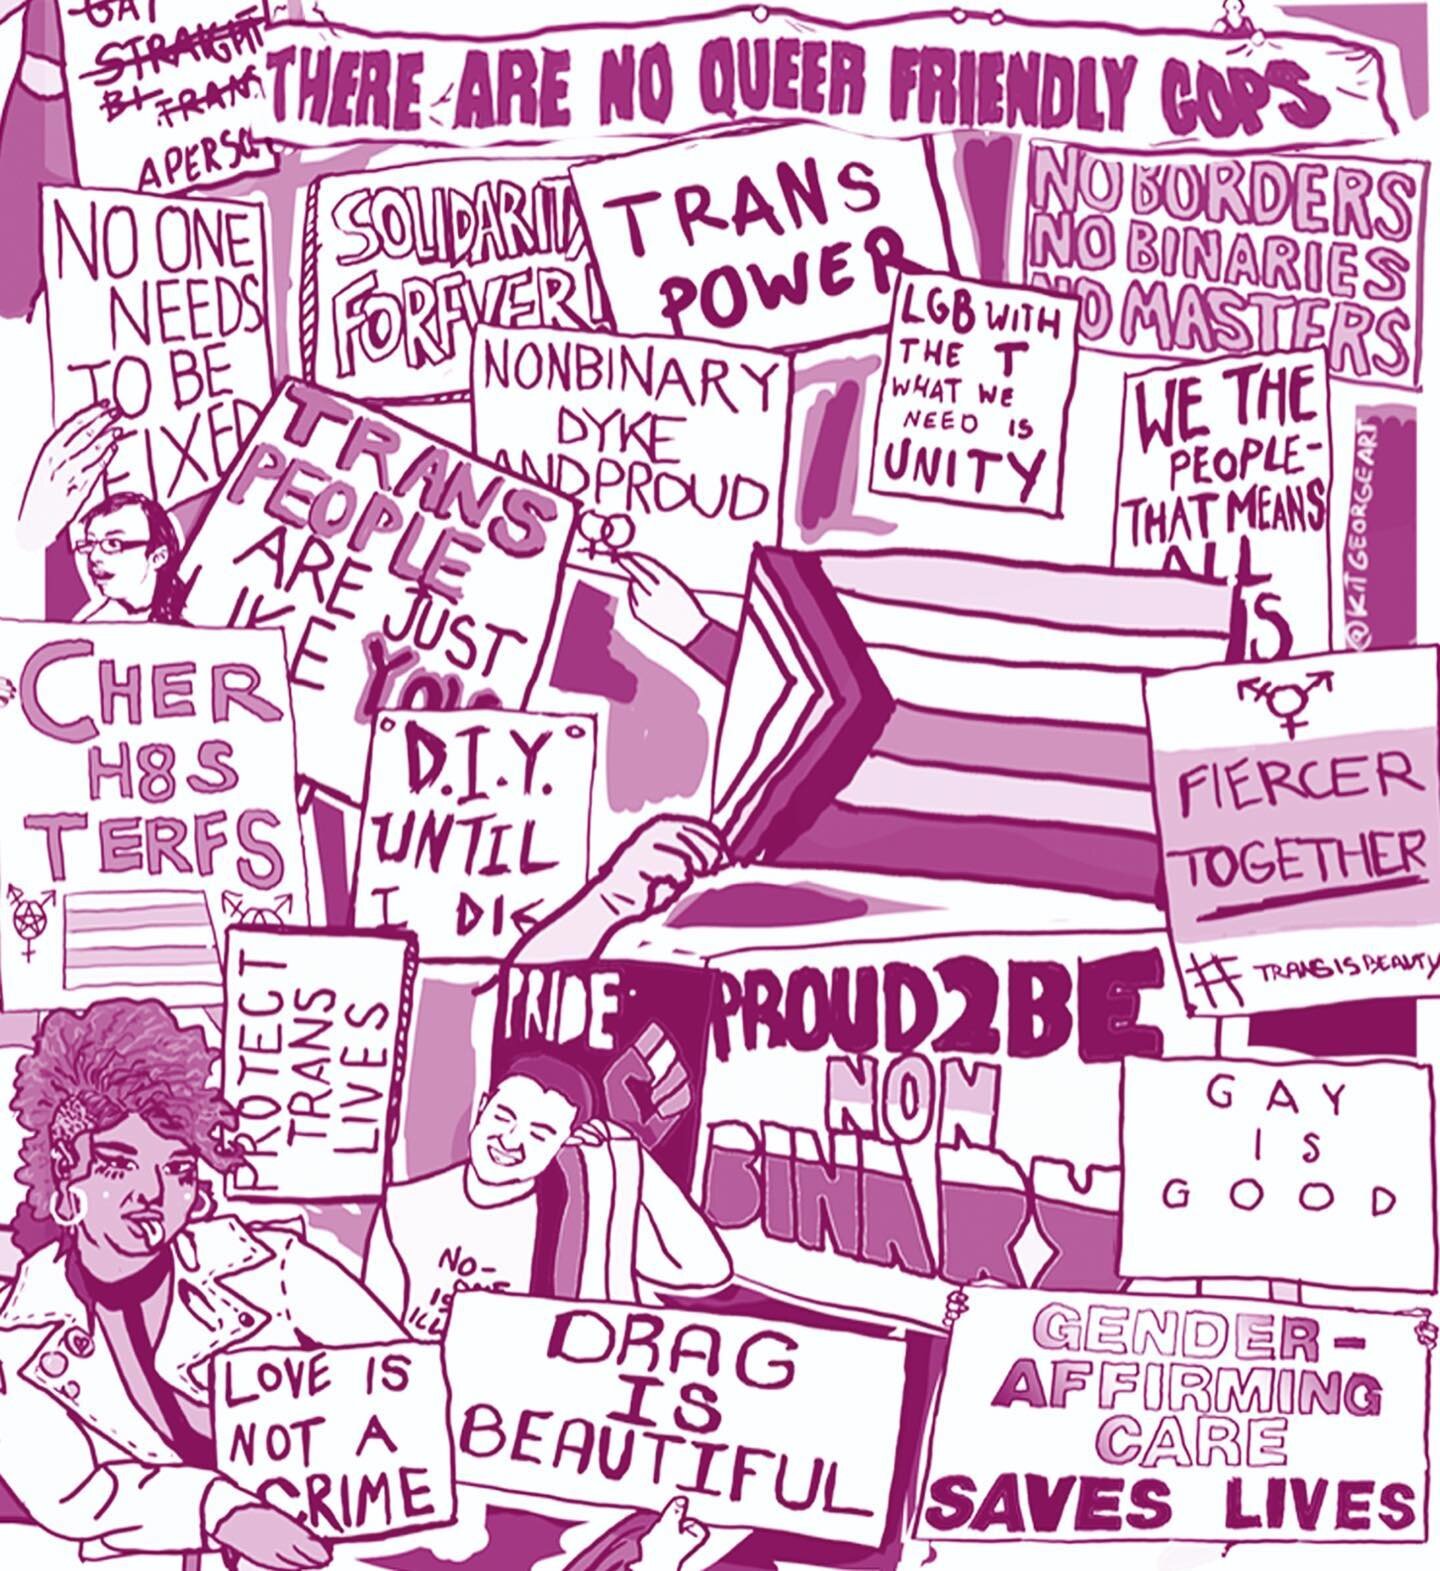 Had loads of fun creating this for a poster for SOS drag events in Reading / @sheer.obsession &amp; @lets_be_mister_frank !

Drawn from protest signs from protests I&rsquo;ve been to and protests I haven&rsquo;t

#digitalillustration #posterart #drag